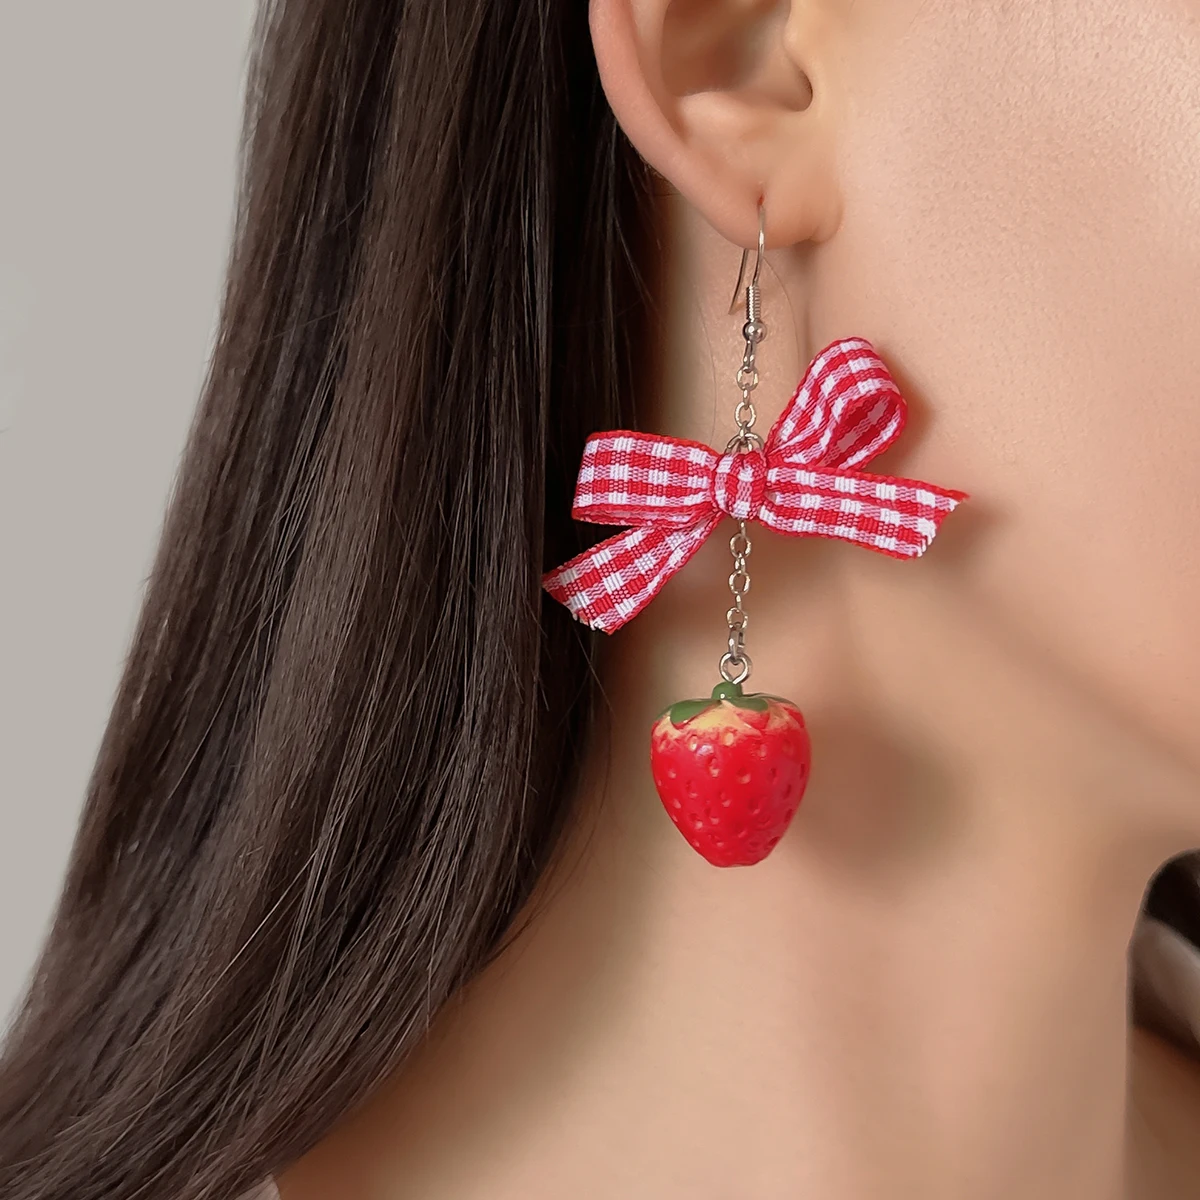 

SHIXIN Cute Strawberry Ear Jewelry for Kids Gift Simple Fashion Pastoral Style Ear Studs Bow y2k Red Earrings Jewelry for Women